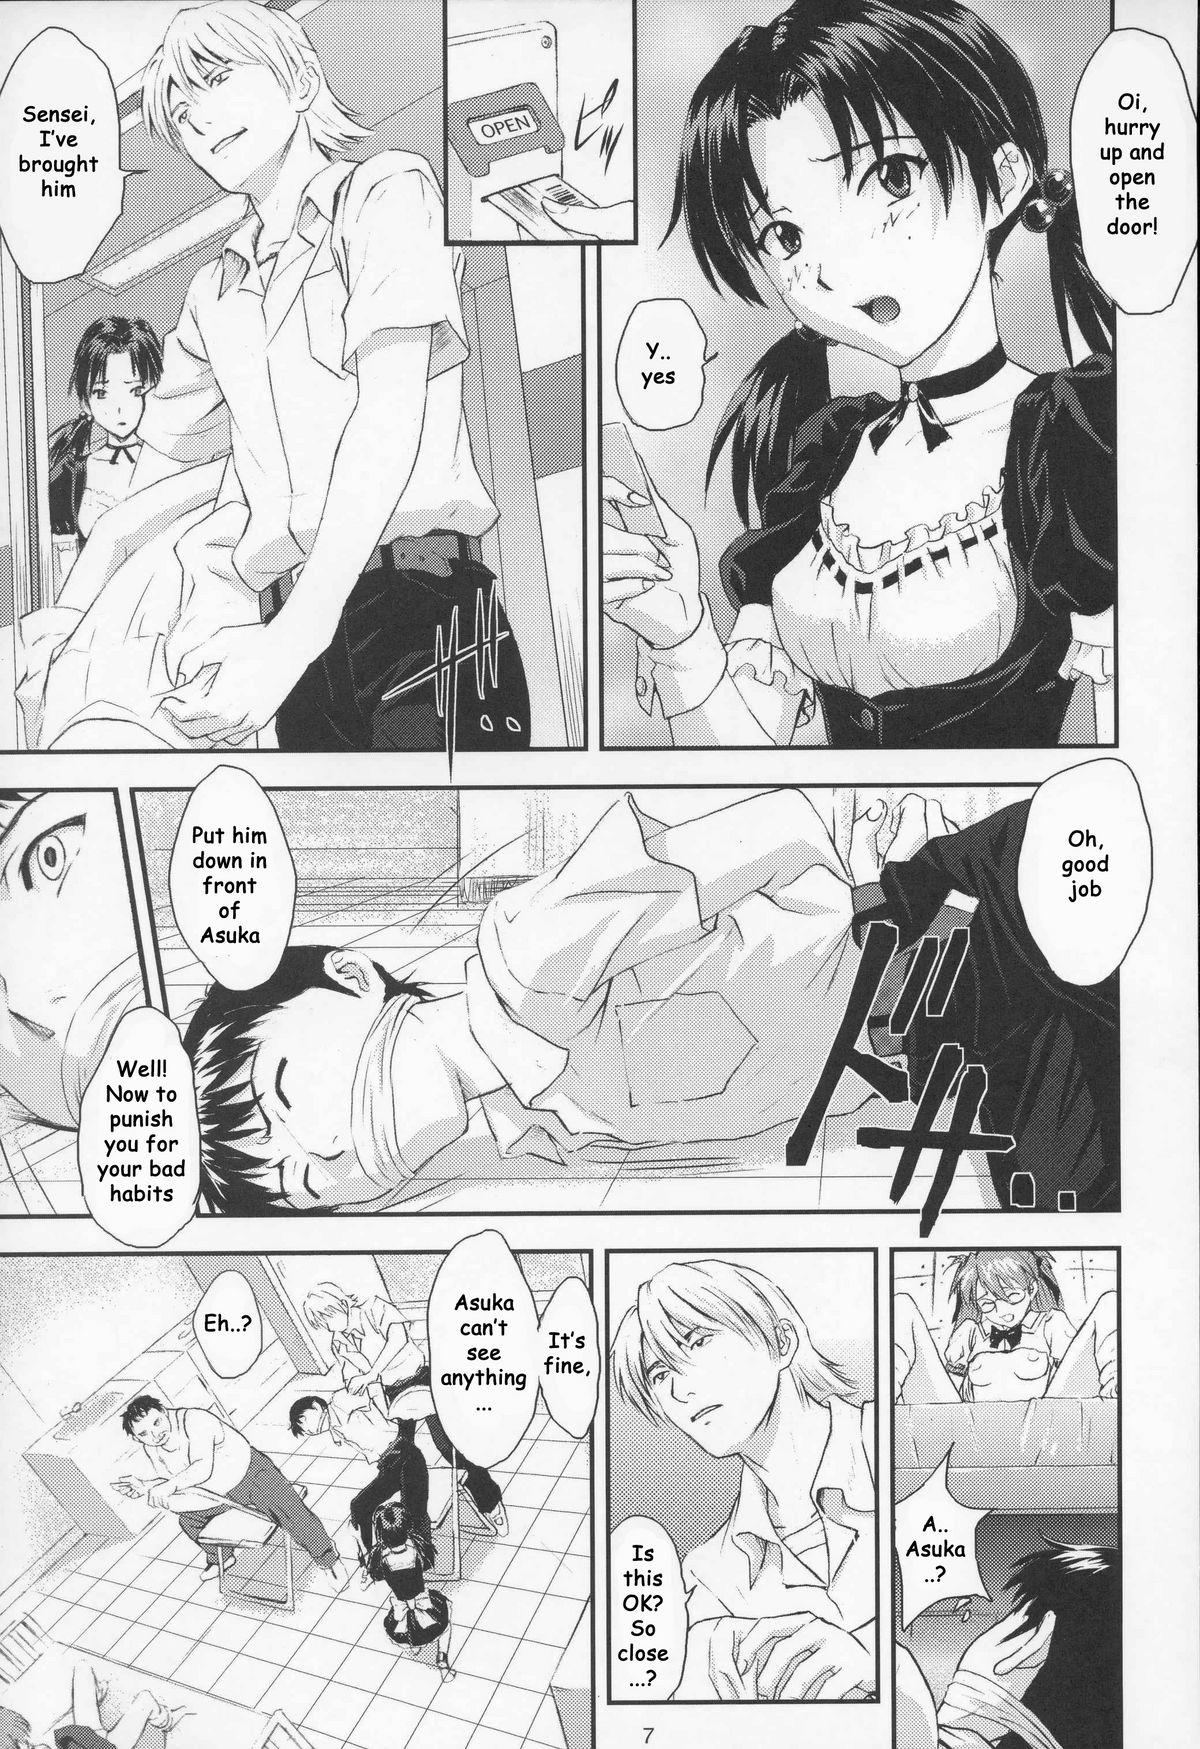 Hot Whores A-six Kanseiban - Neon genesis evangelion Hot Couple Sex - Page 6